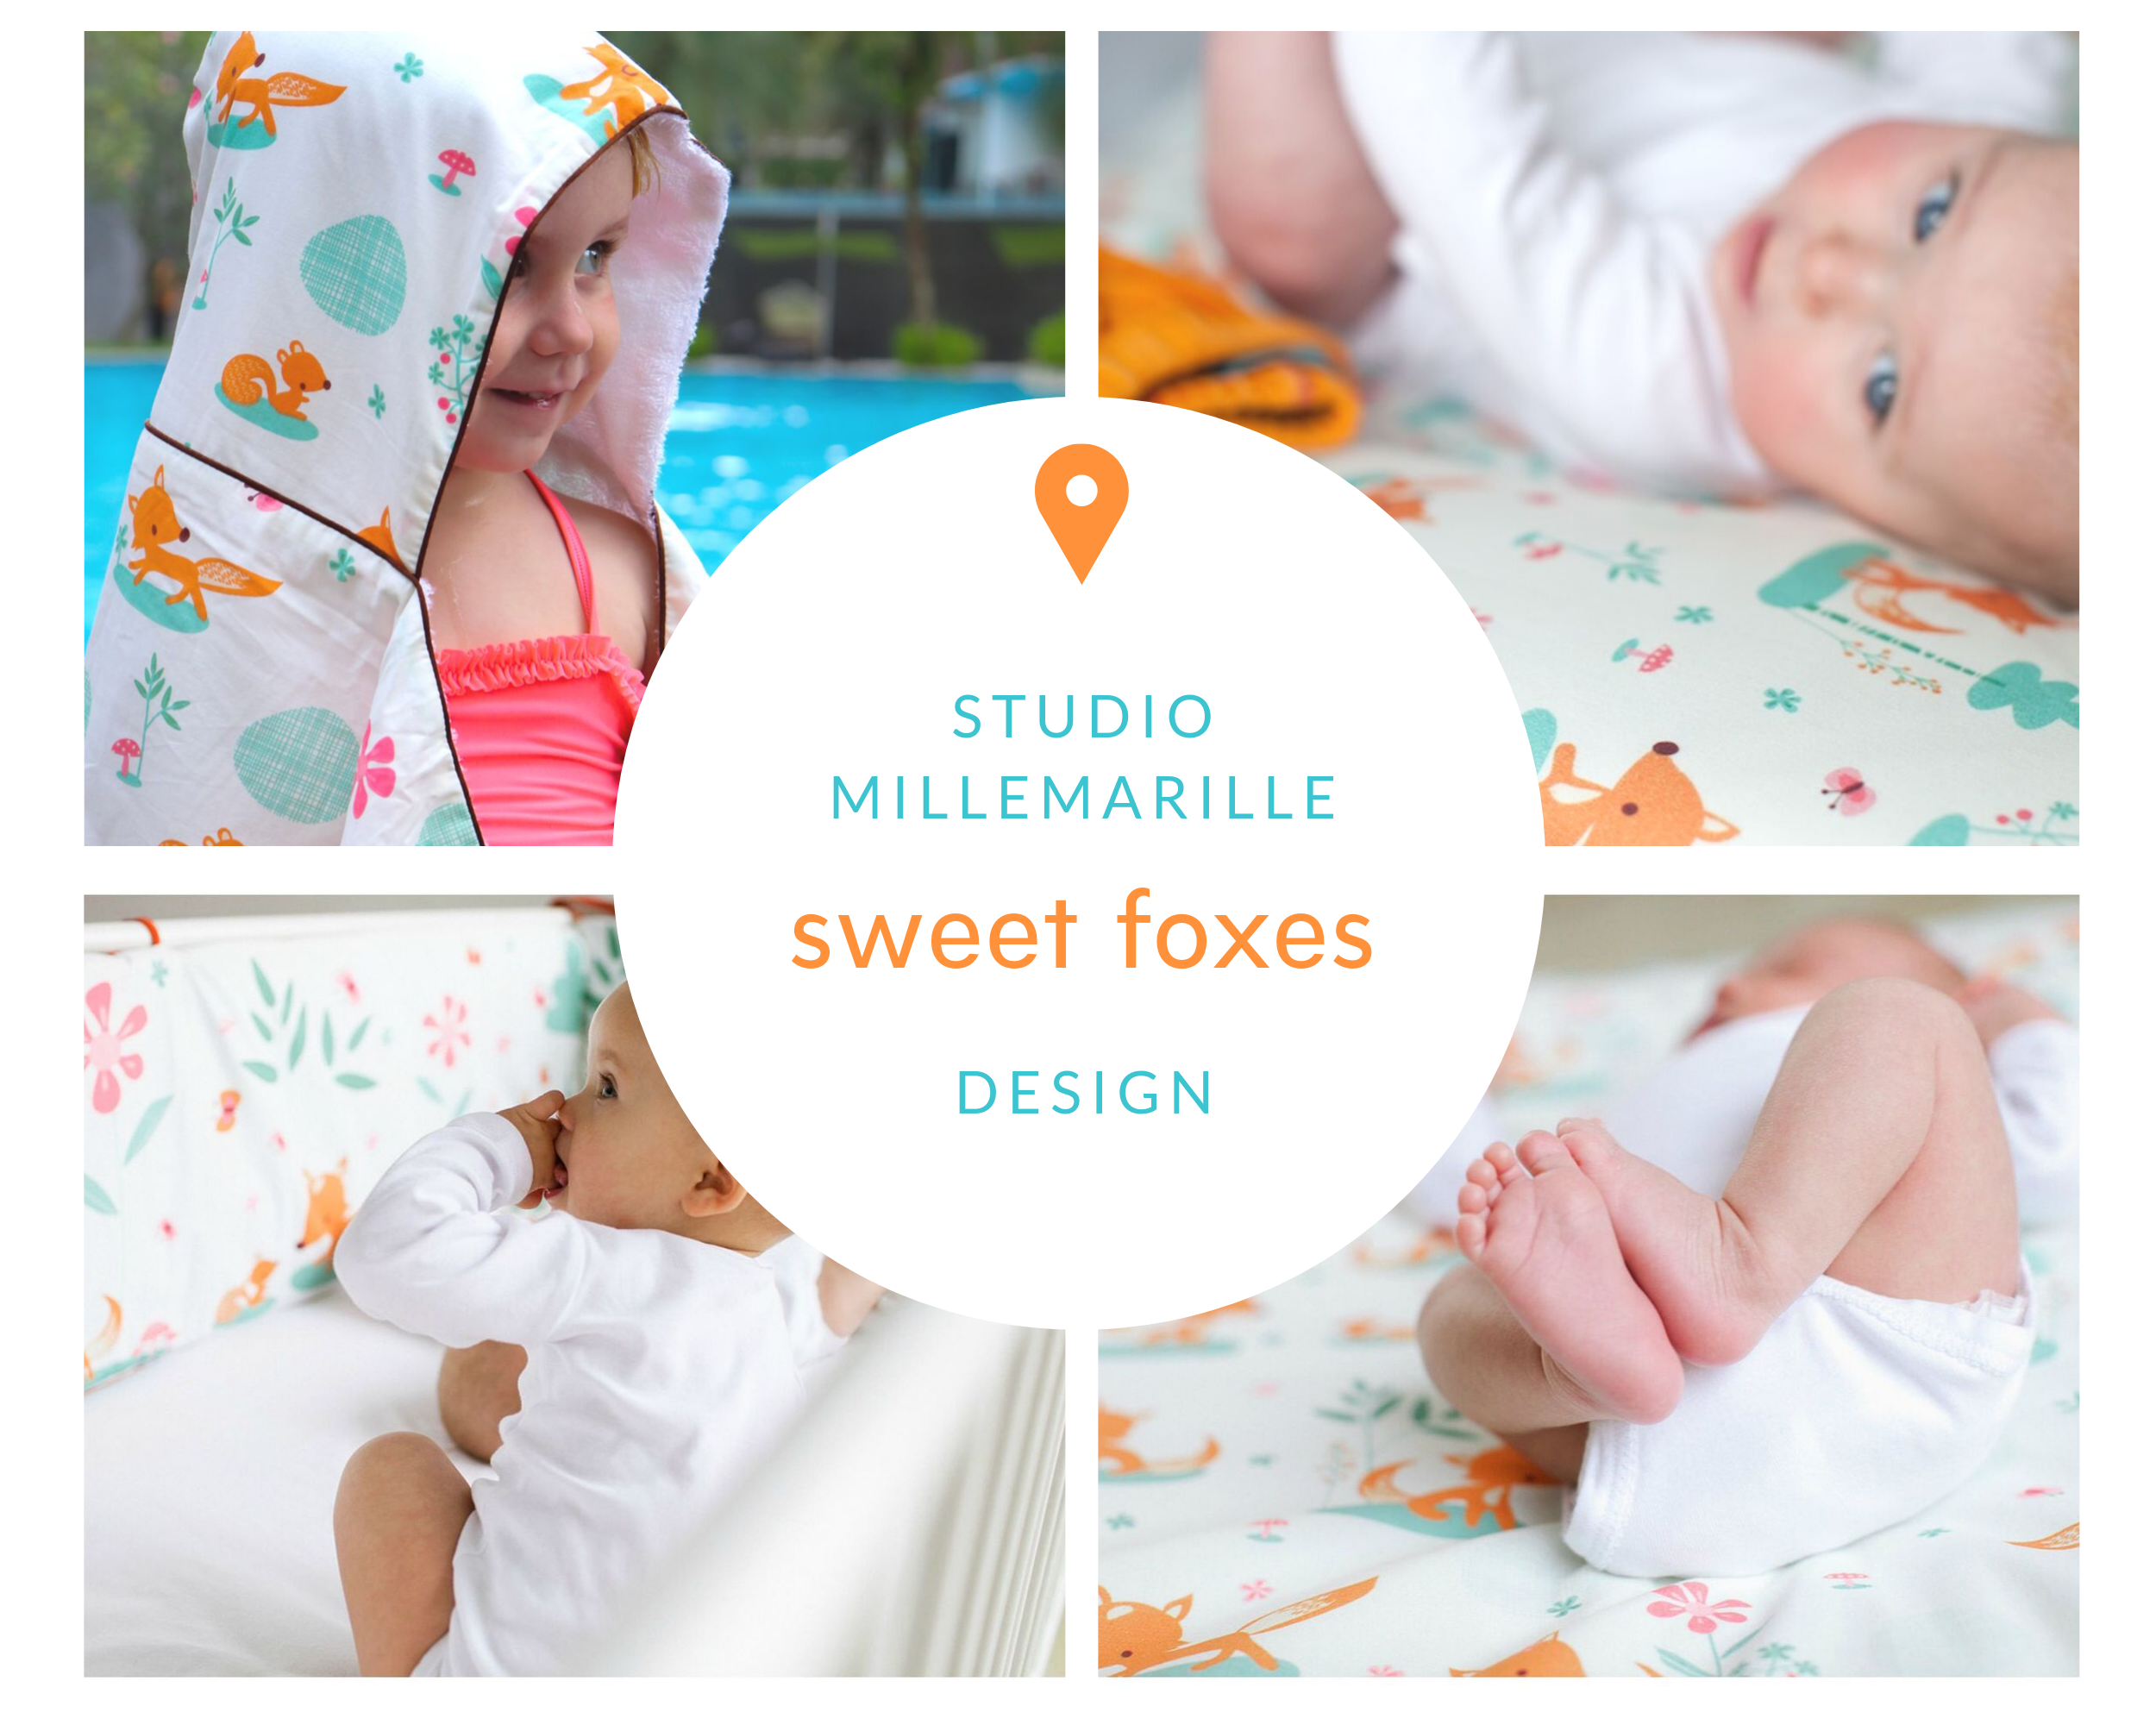 Die millemarille sweet foxes Collection! 